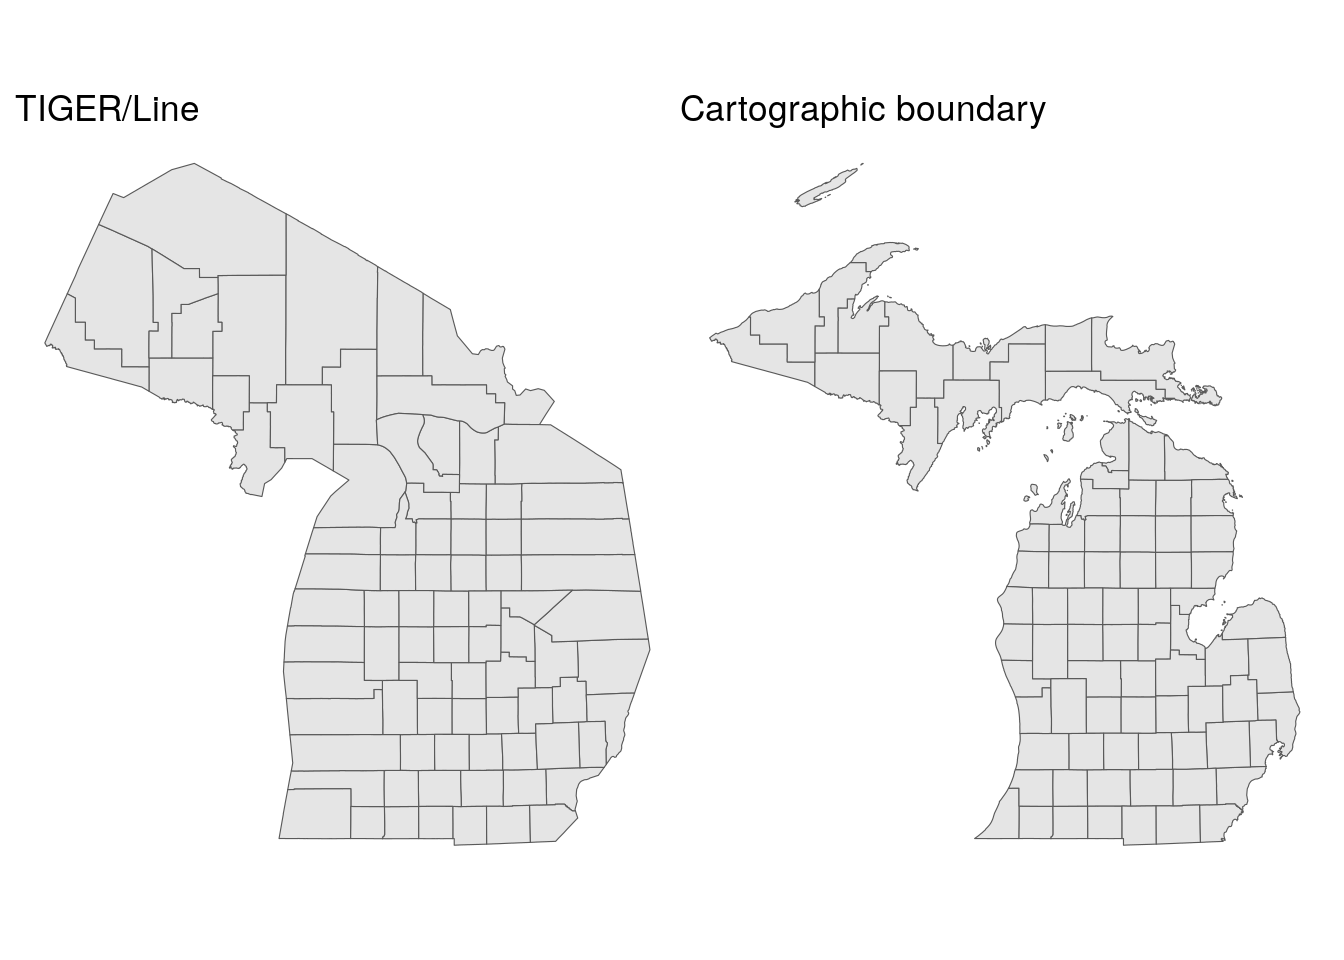 Comparison of TIGER/Line and cartographic boundary files for Michigan counties